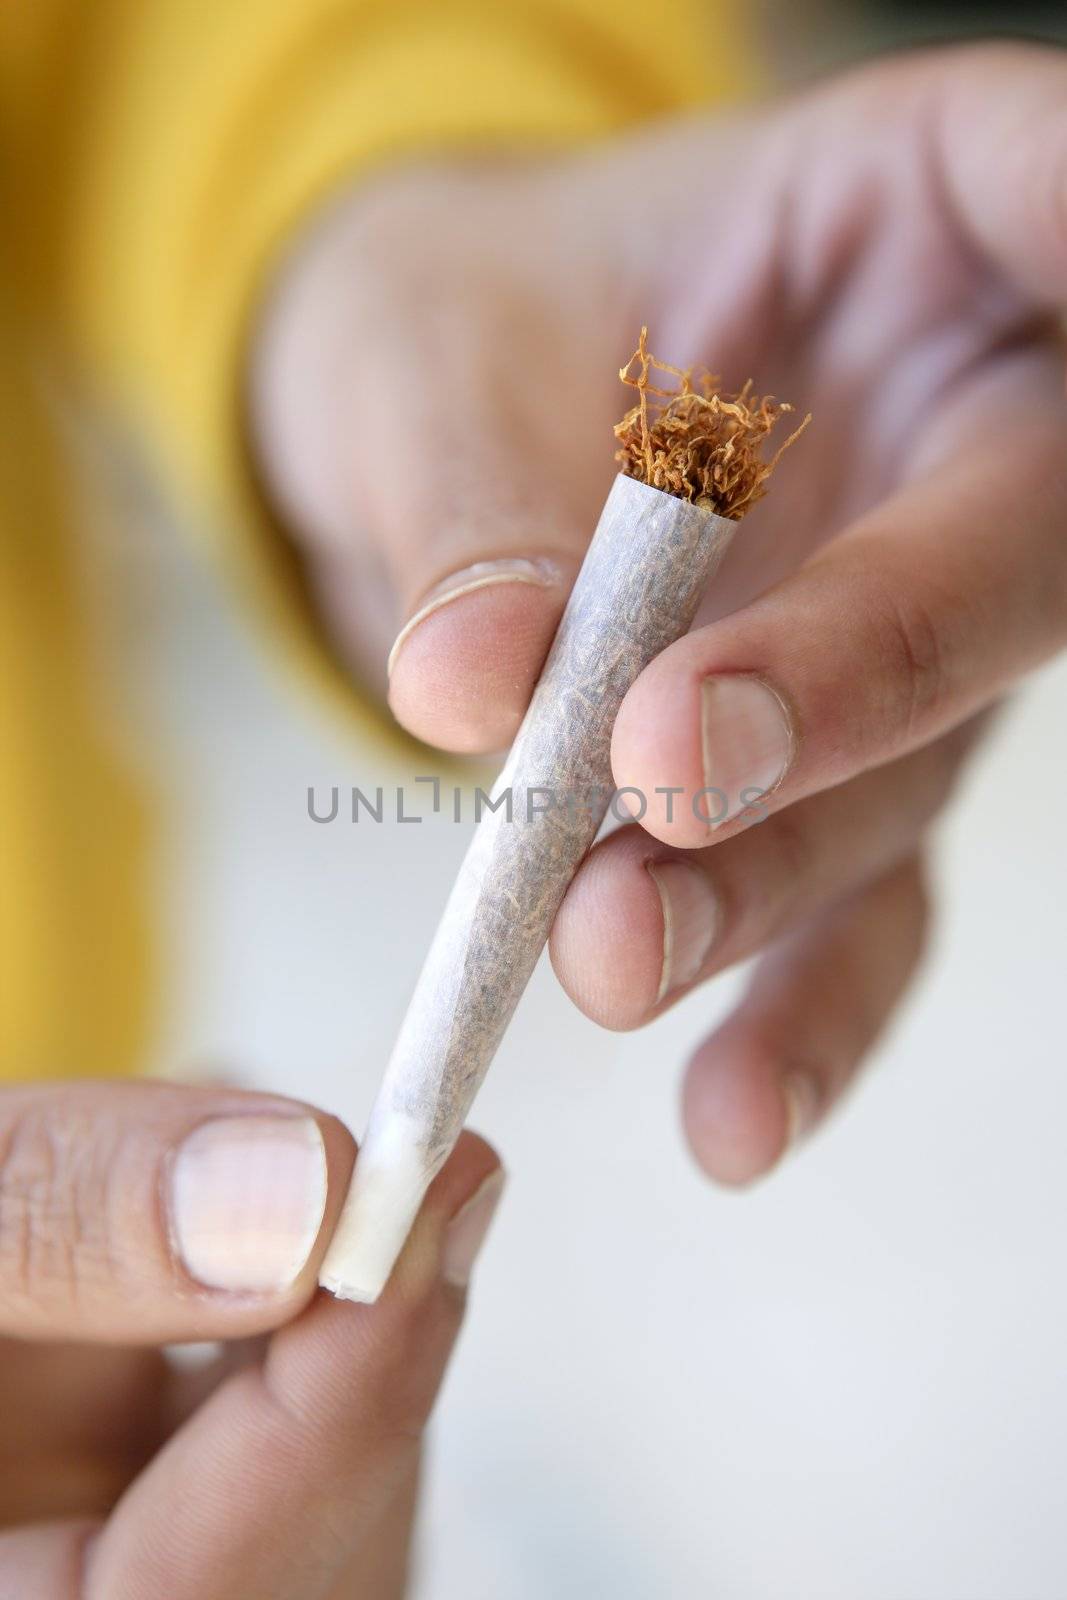 joint tobacco cigarette in hands prepared to smoke